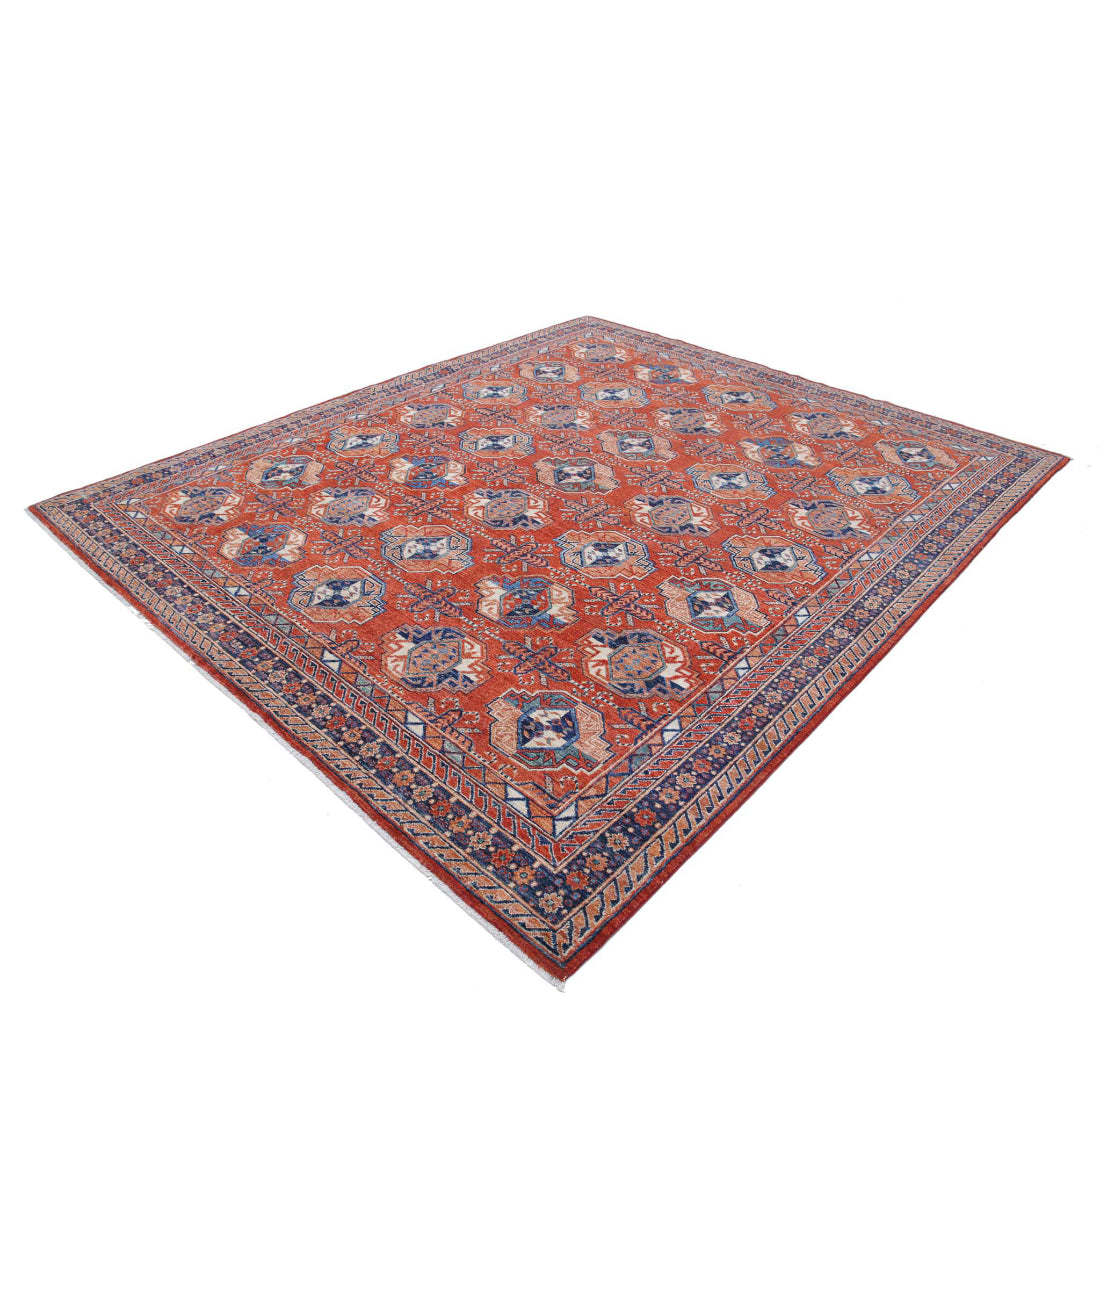 Hand Knotted Nomadic Caucasian Humna Wool Rug - 8'2'' x 9'9'' 8'2'' x 9'9'' (245 X 293) / Rust / Blue